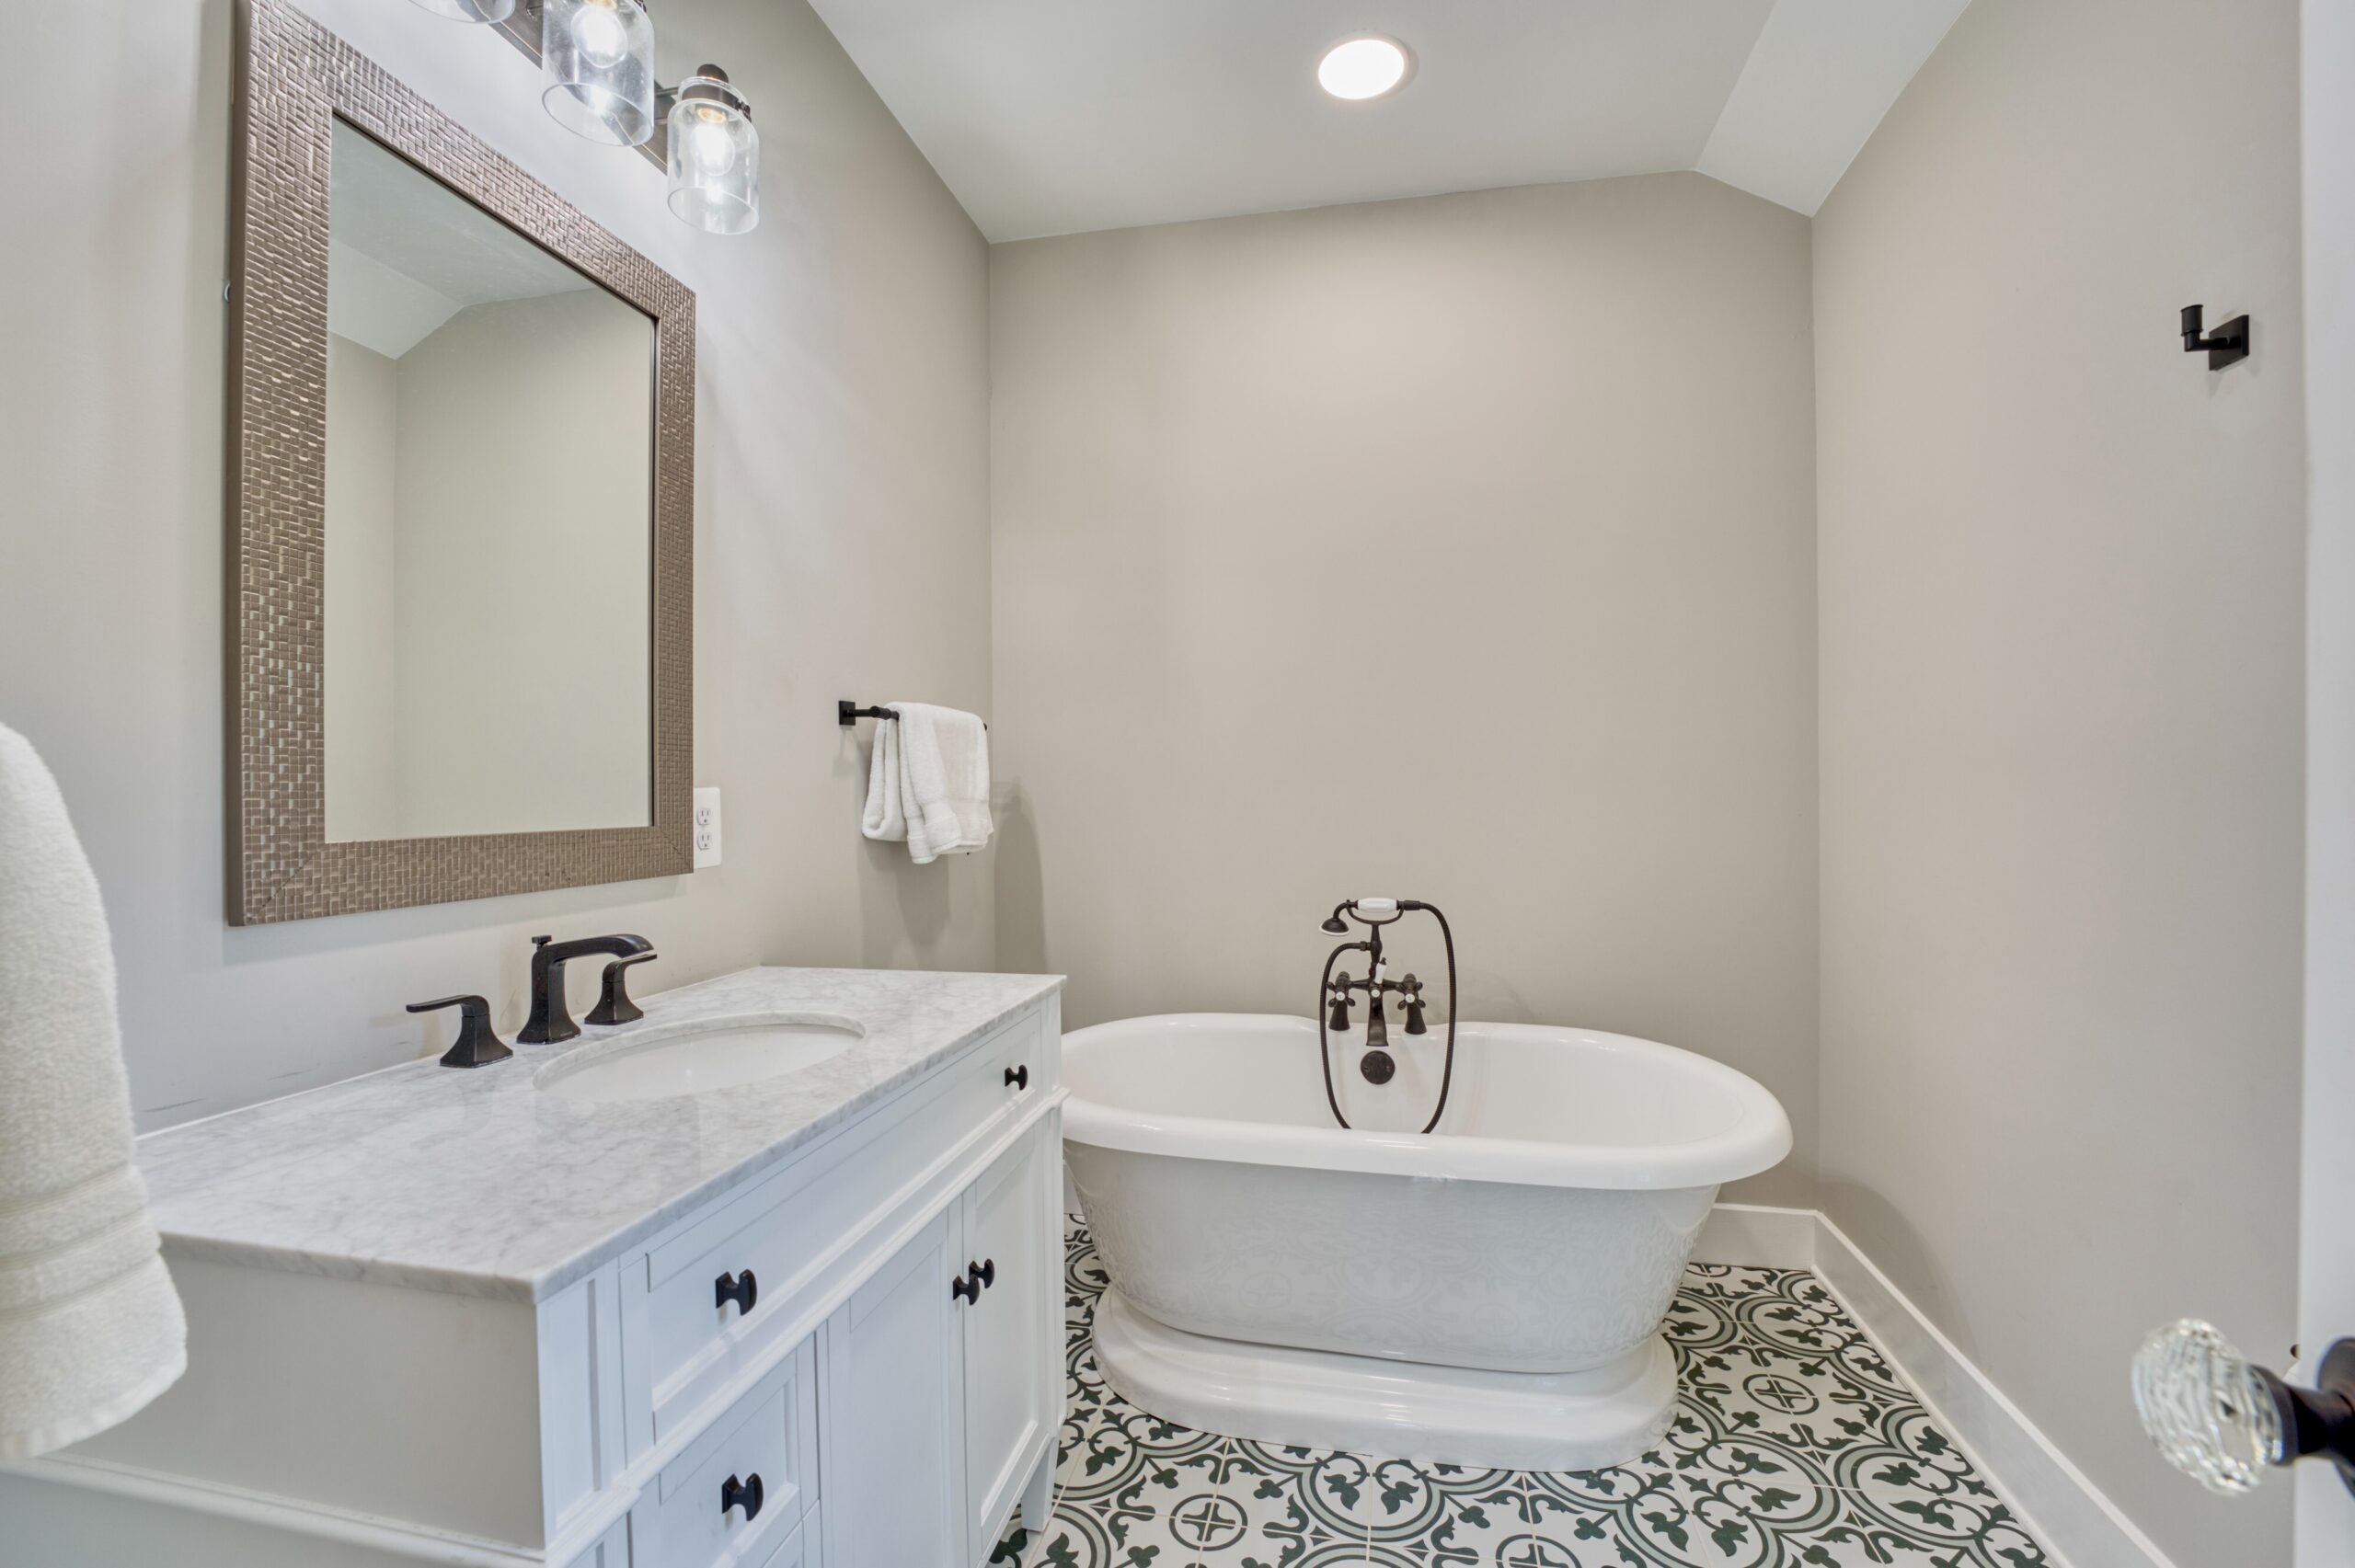 Remodeled bathroom in historic home in Hamilton, VA with intricate black/white tile floors and soaking tub